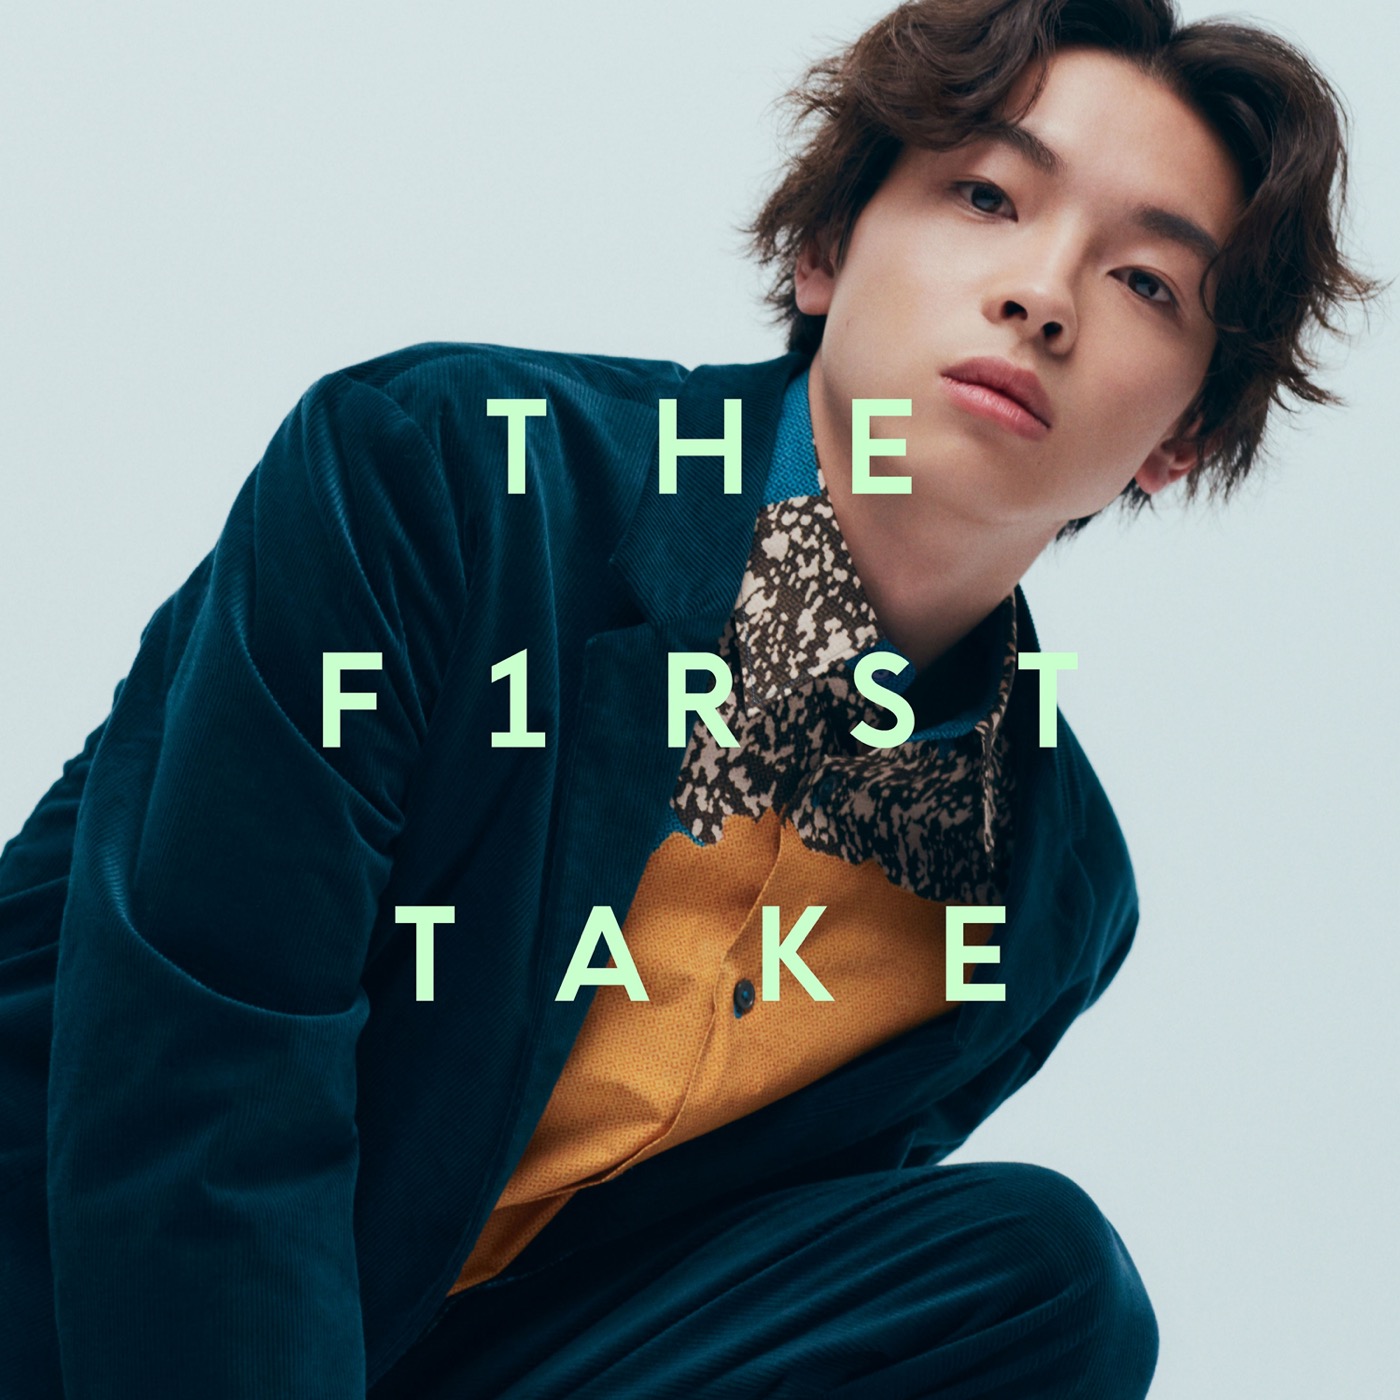 imase『THE FIRST TAKE』で披露した「ユートピア」の音源配信リリースが決定 - 画像一覧（1/2）